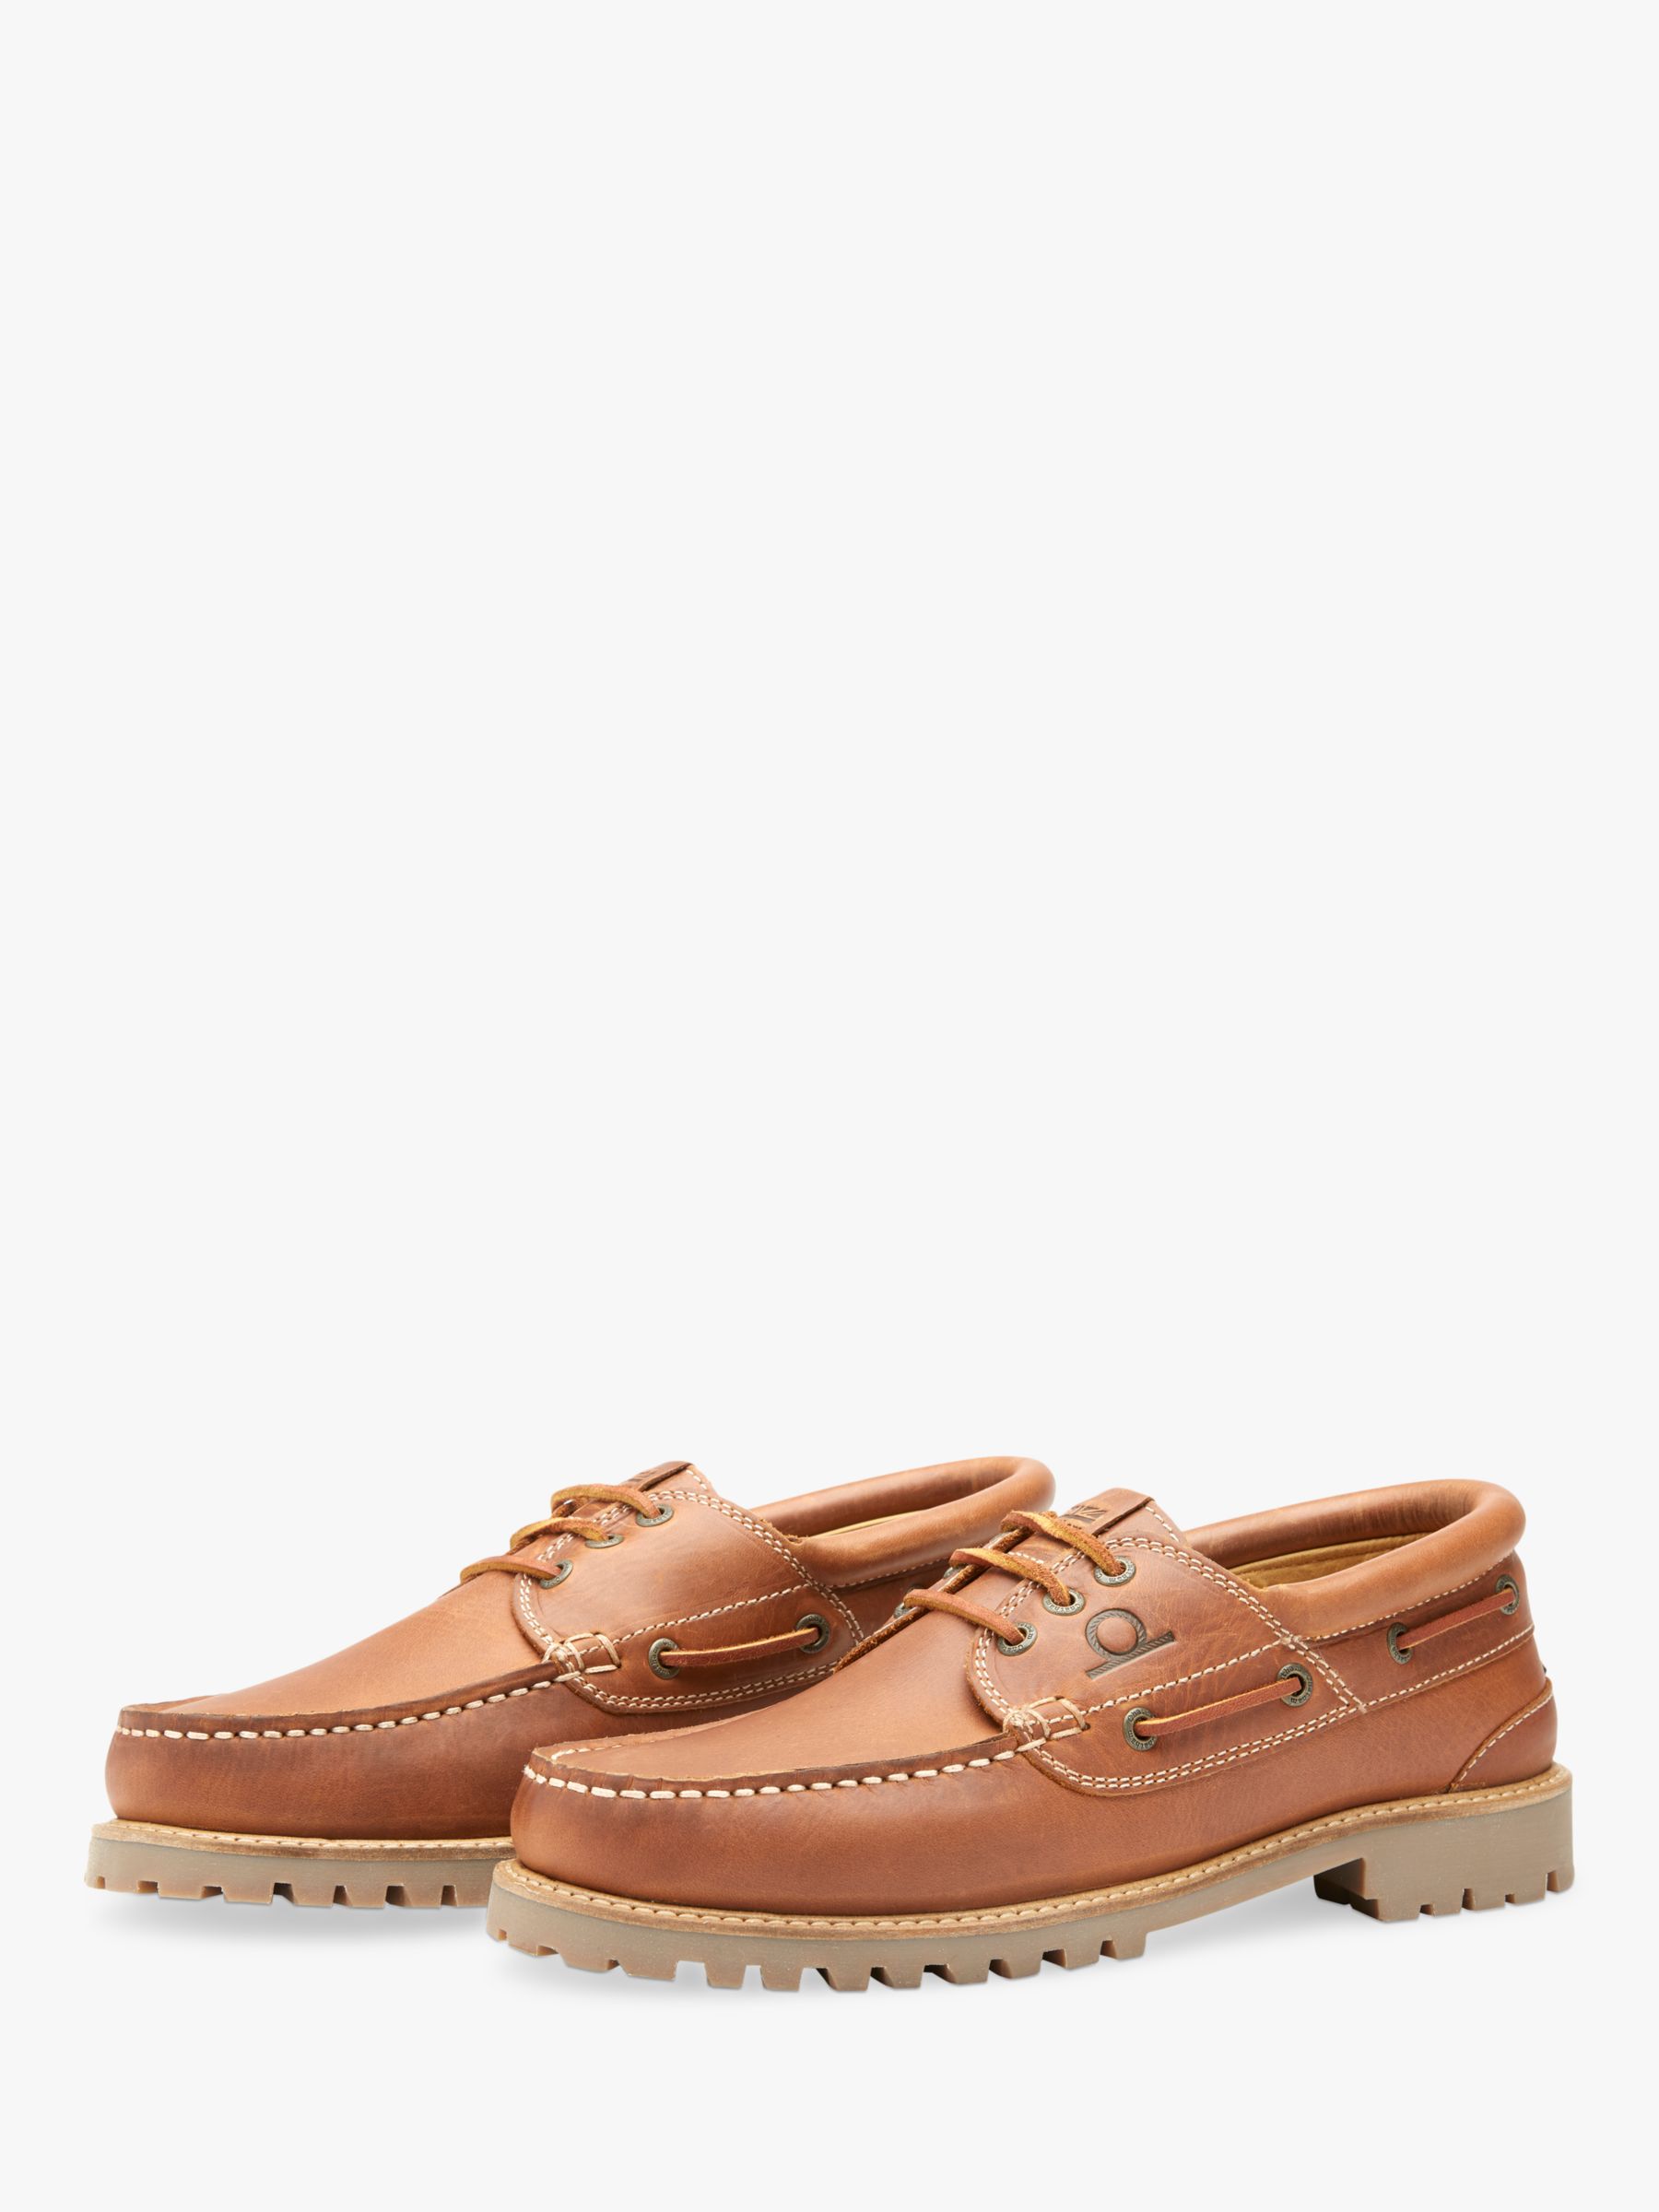 Chatham Sperrin Leather Boat Shoes, Tan, 6S